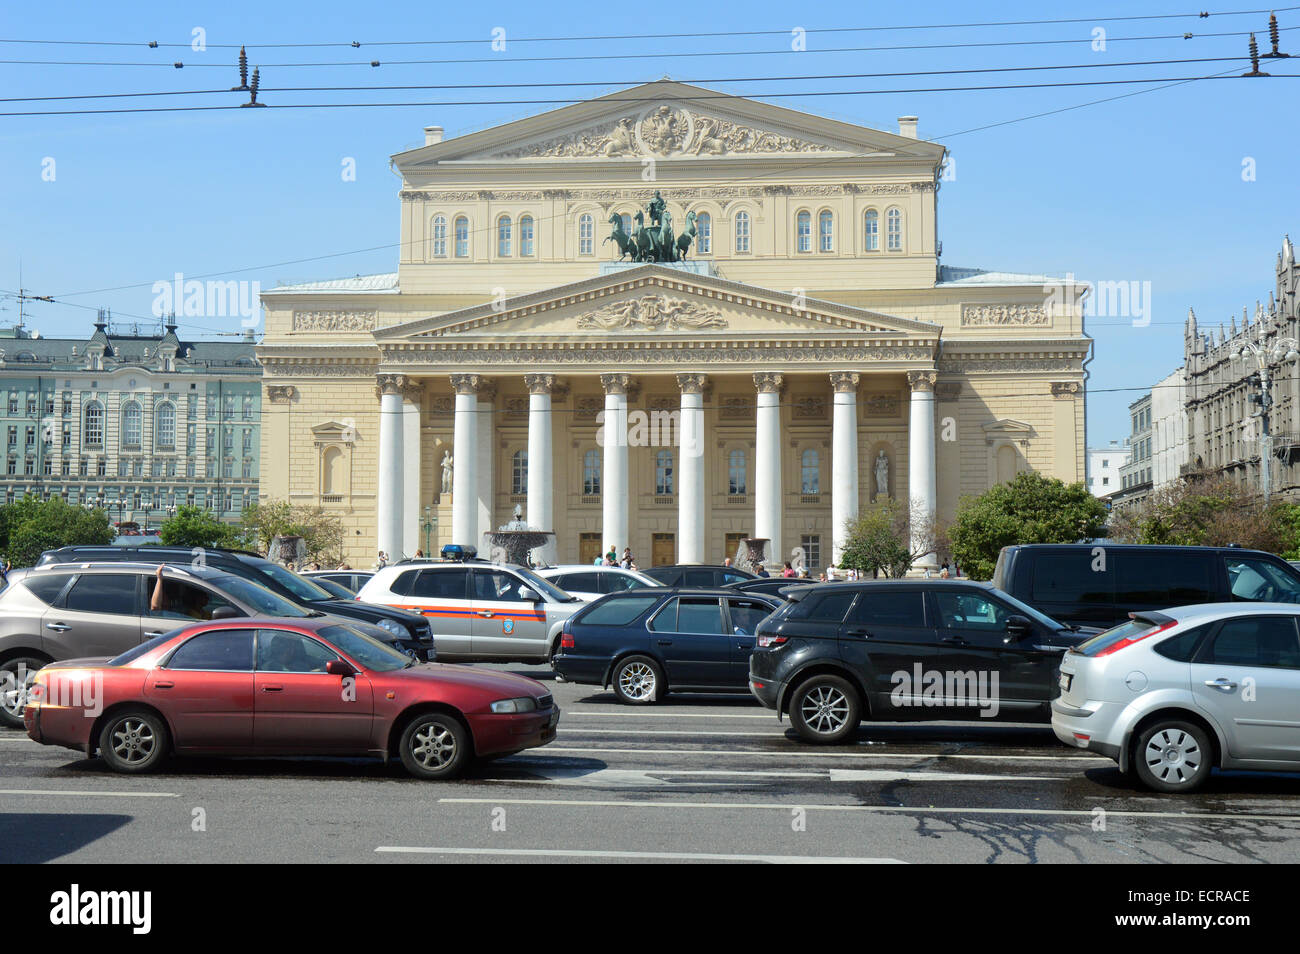 Large Academic Theatre in Moscow. The theater square Stock Photo